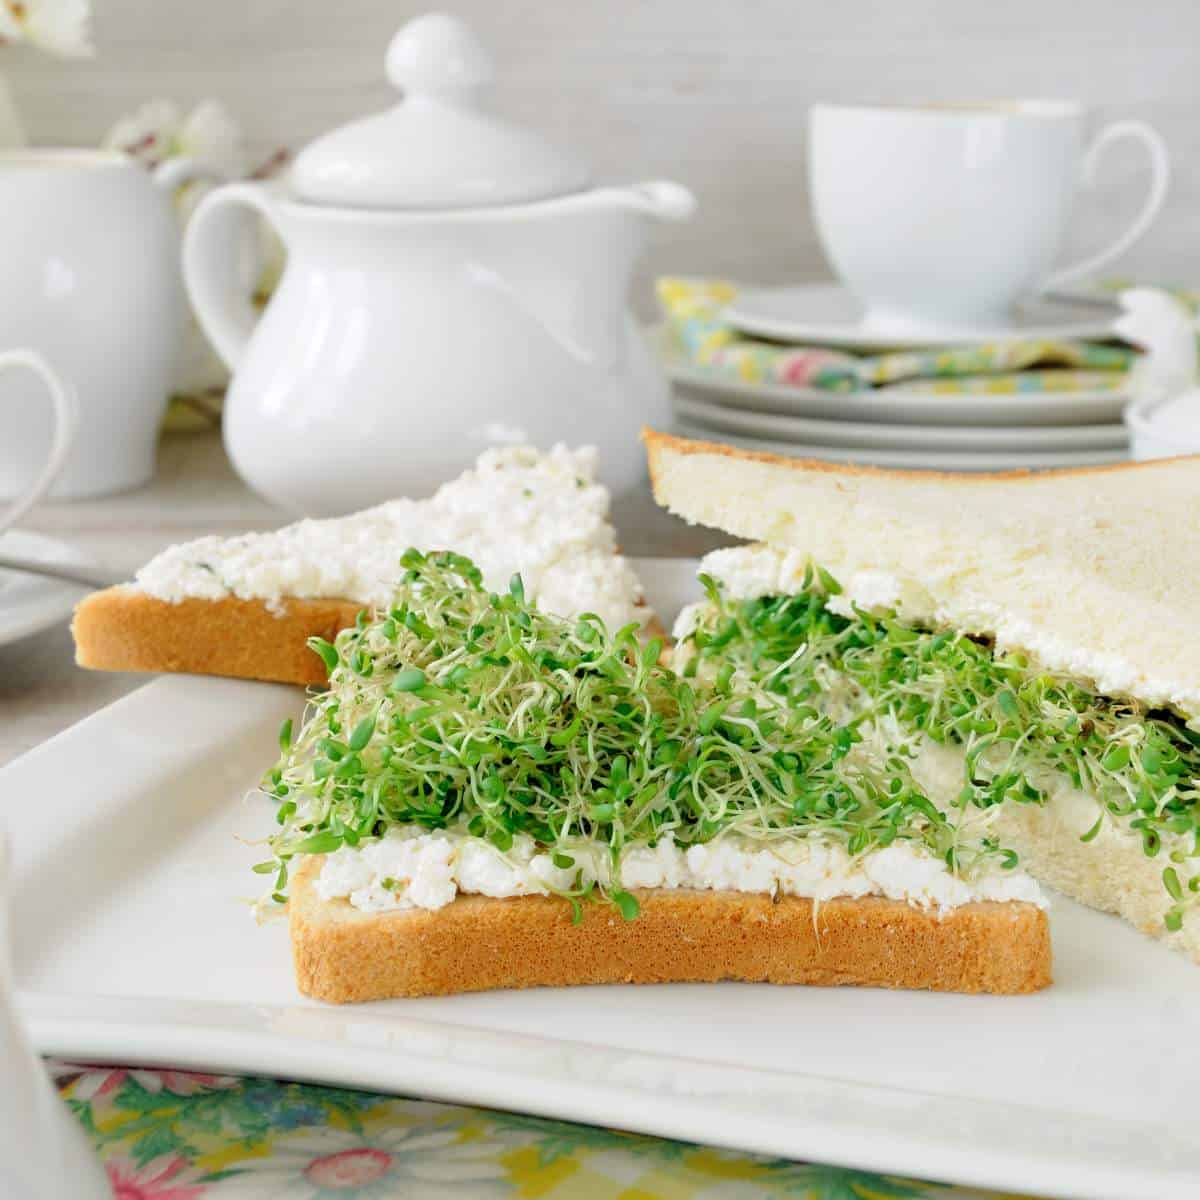 6-Sprouted-Alfalfa-Sandwich-with-Soft-Ricotta.jpg